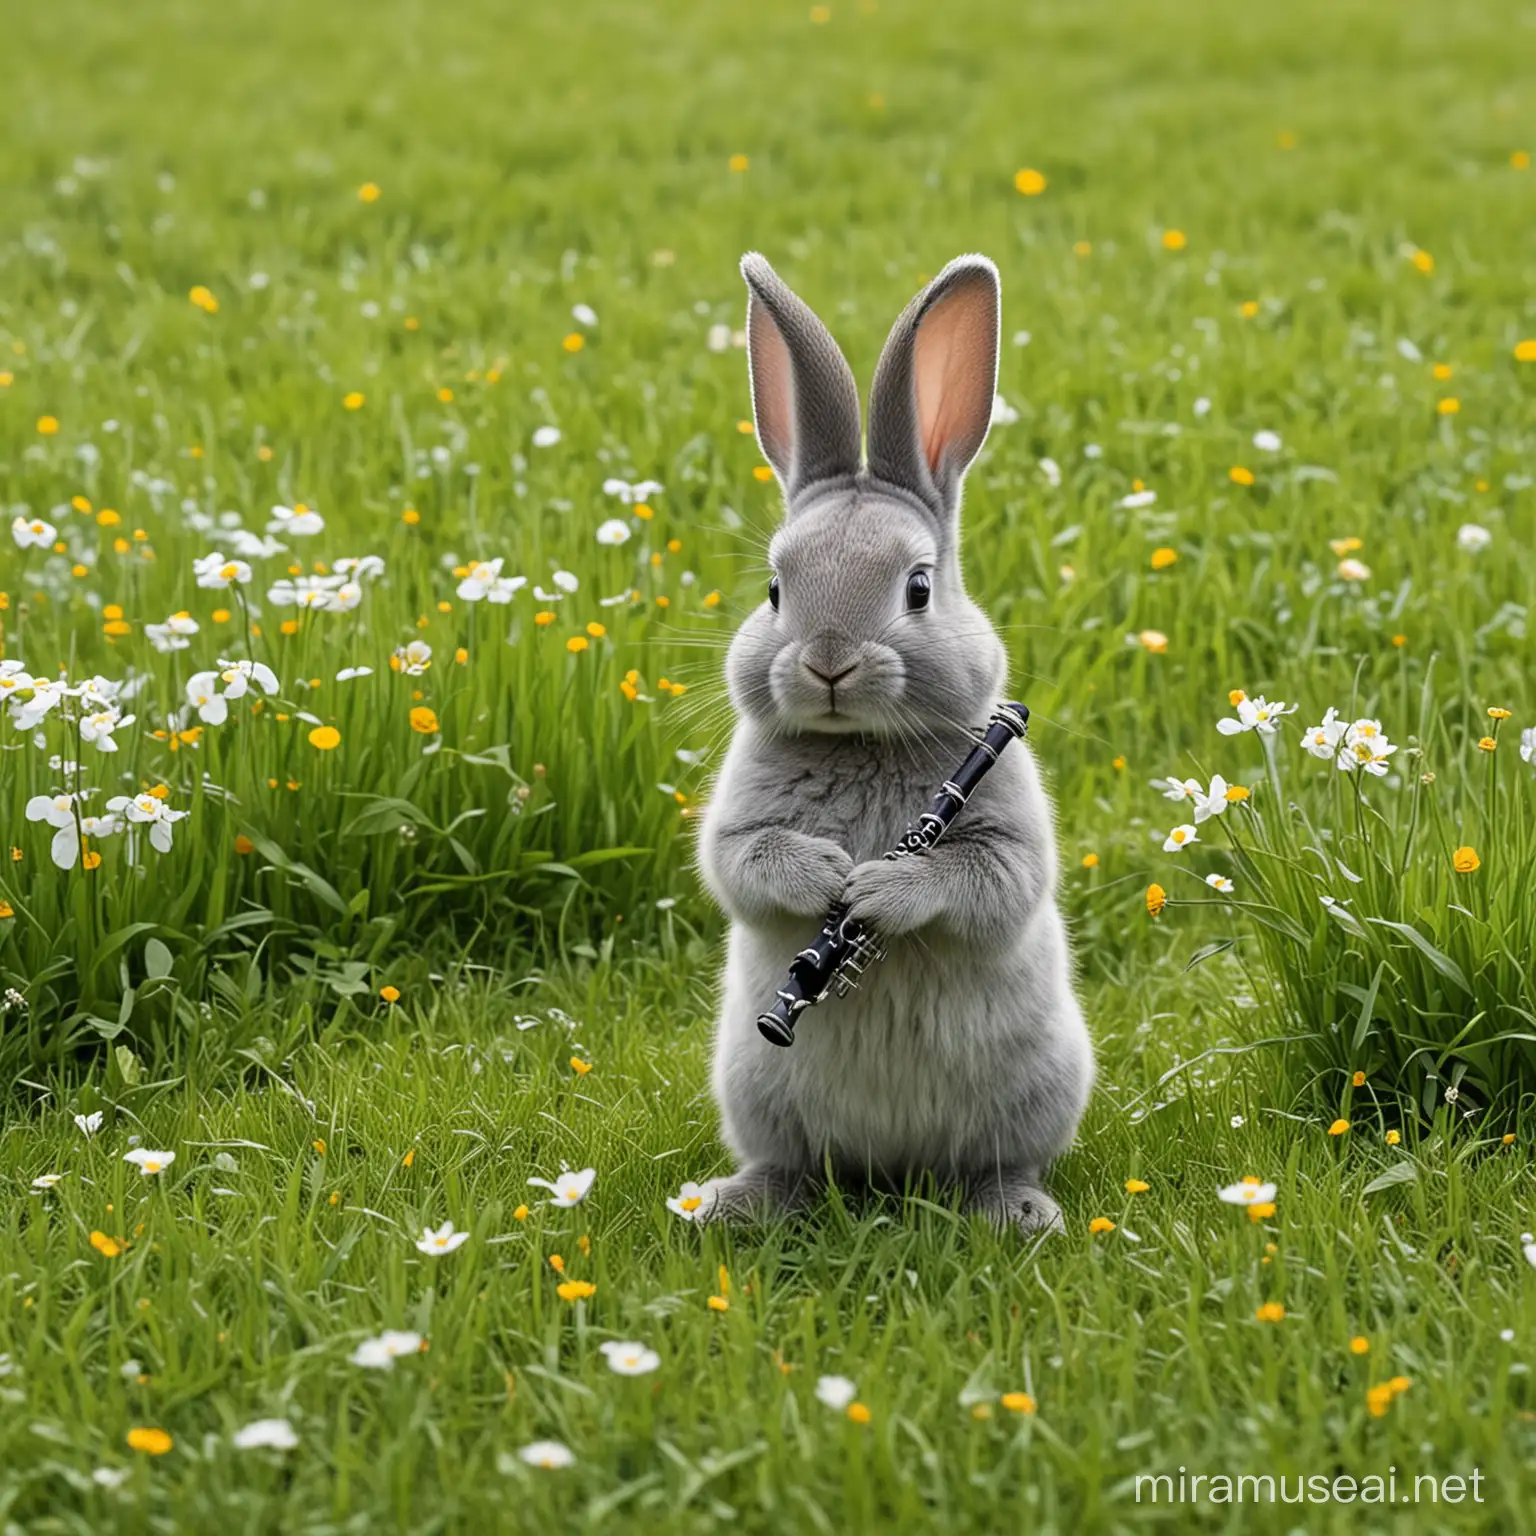 A small grey bunny playing oboe on a green field full of grass and flowers